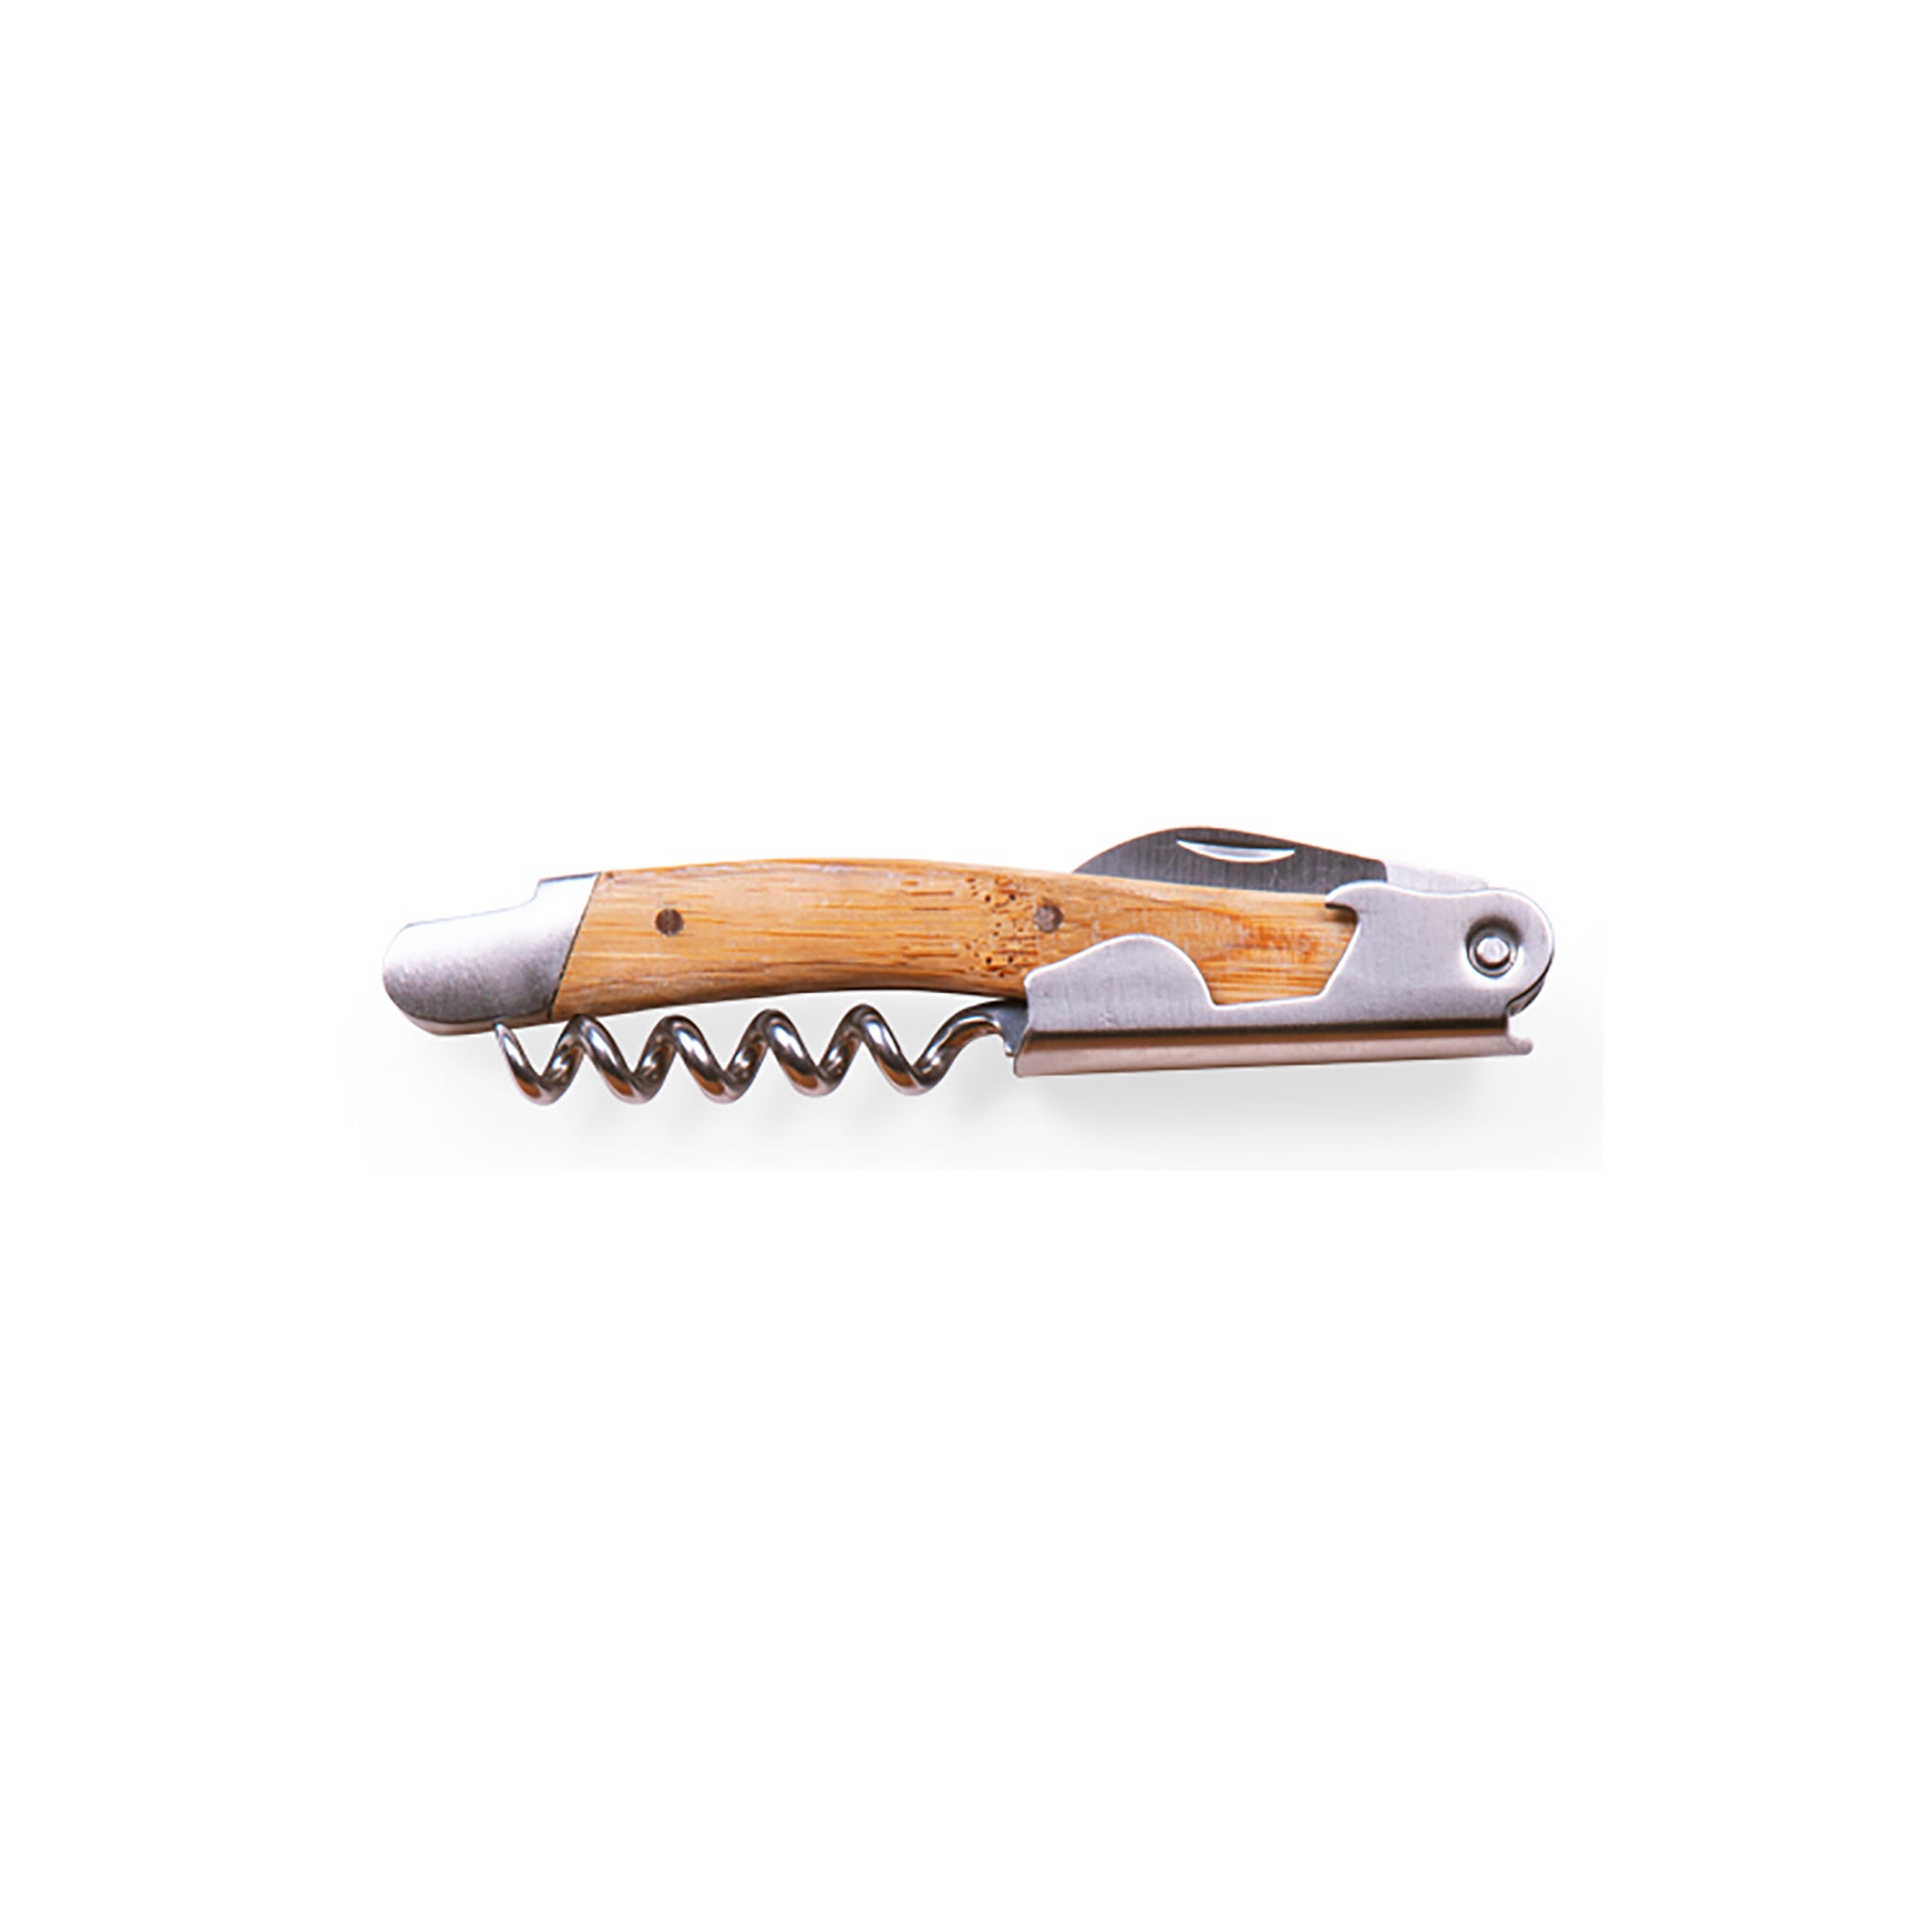 NC State Wolfpack - Elan Deluxe Corkscrew In Bamboo Box